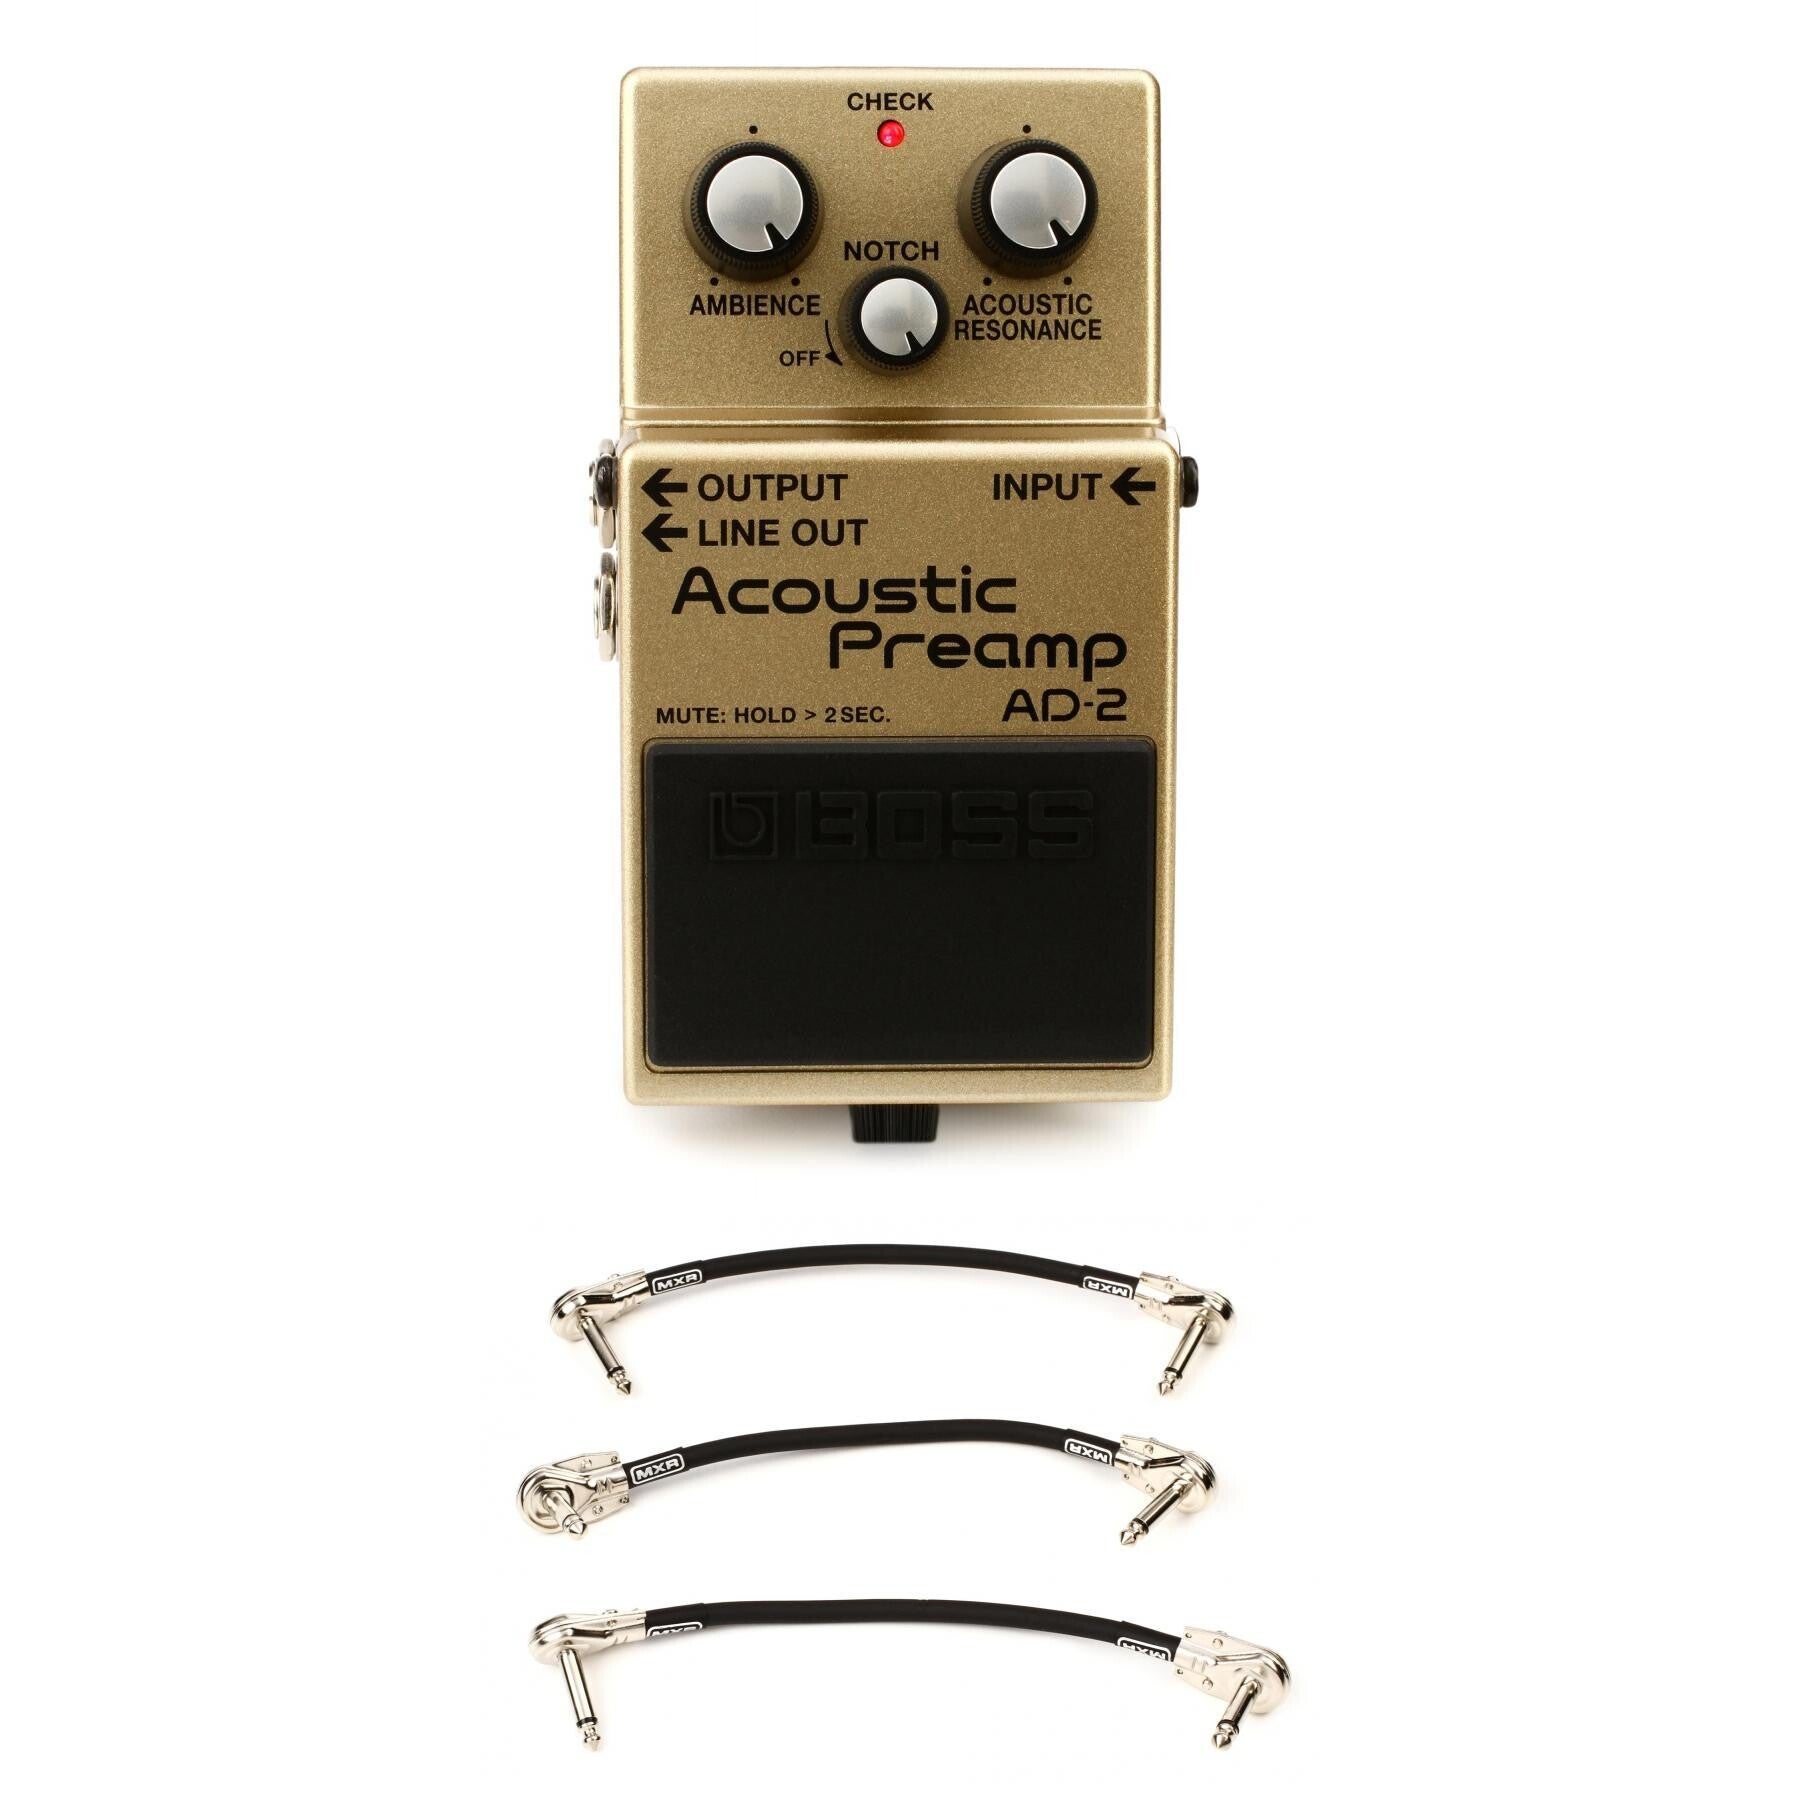 Boss AD-2 Acoustic Preamp Pedal | Sweetwater